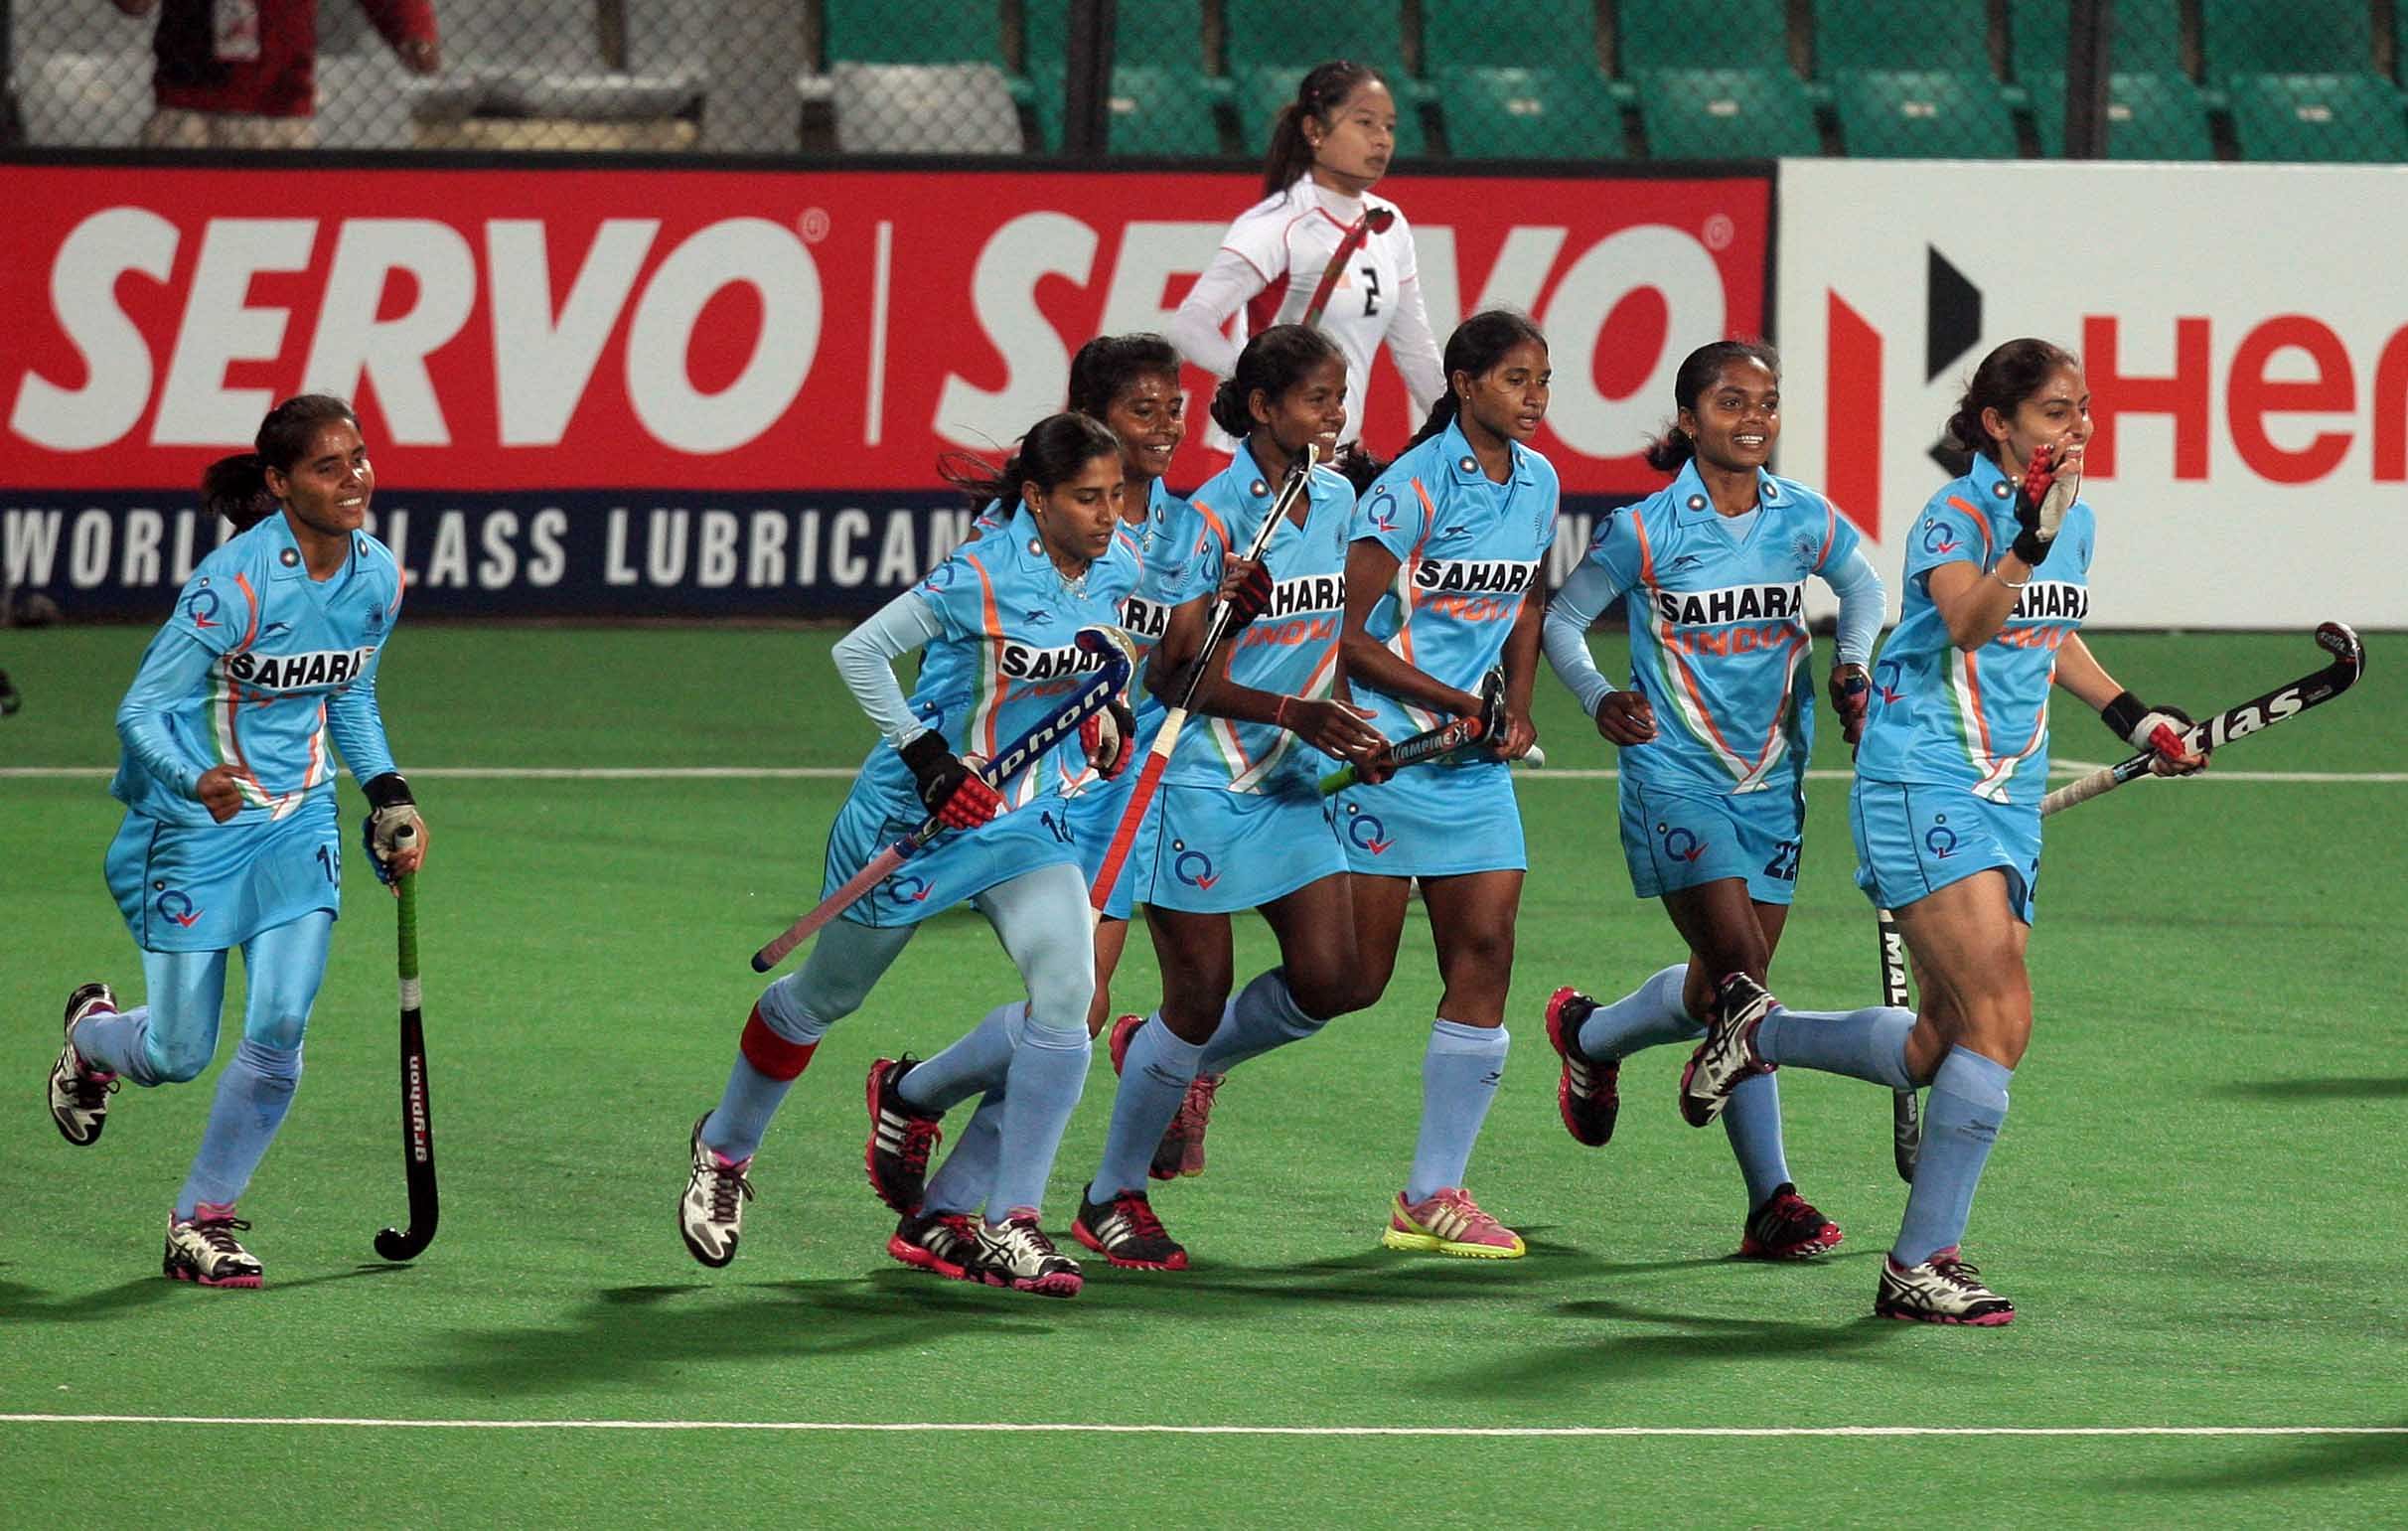 Hero Hockey World league 2013 Indian team celebrates after hit a goal against Malaysia at Delhi on 19th Feb 2013